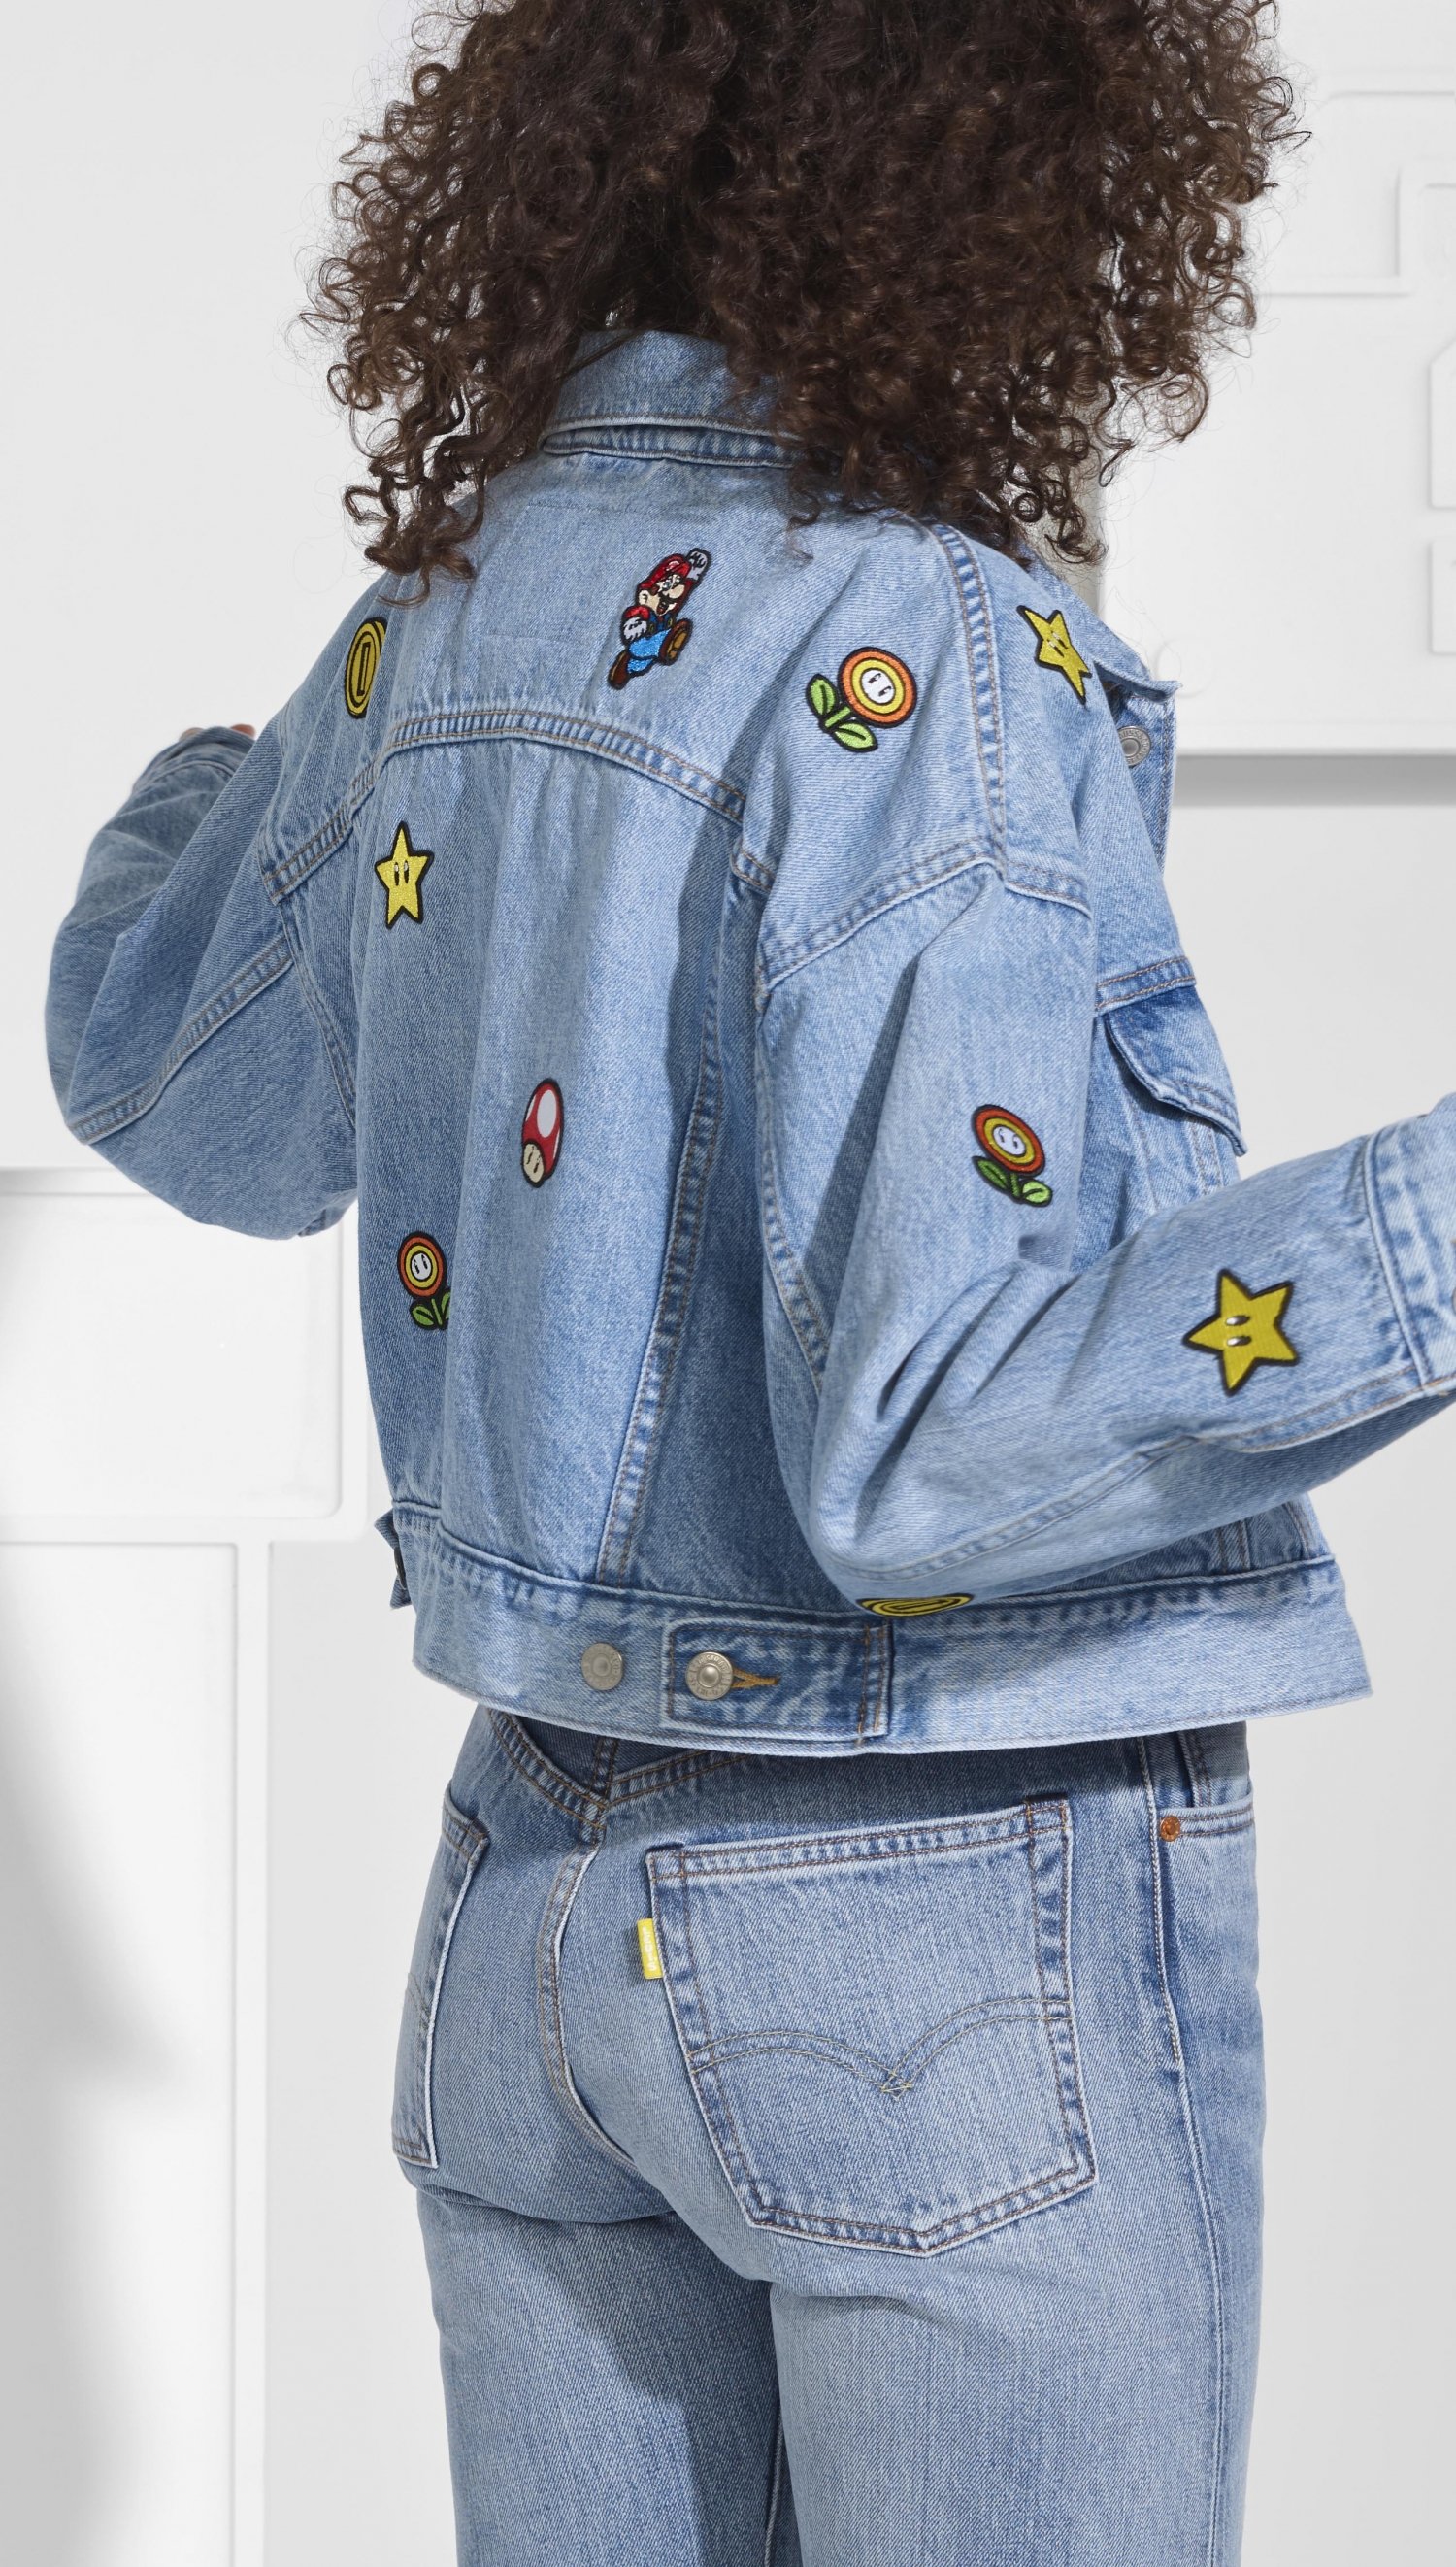 Nintendo teams up with Levi's for Super Mario jackets and jeans